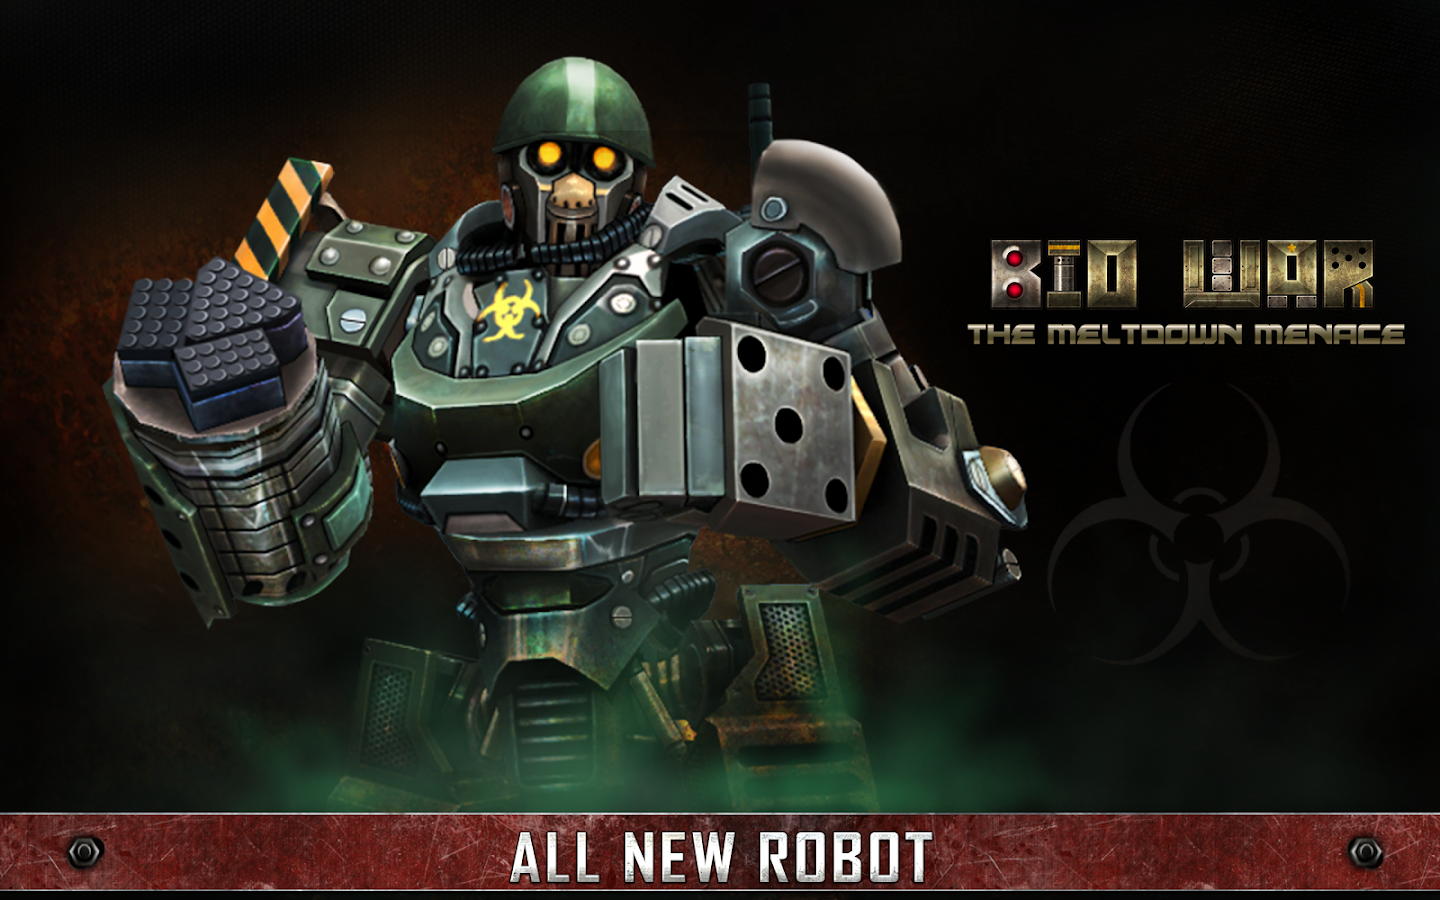 REAL STEEL HD ANDROID APK+DATA FULL GAME